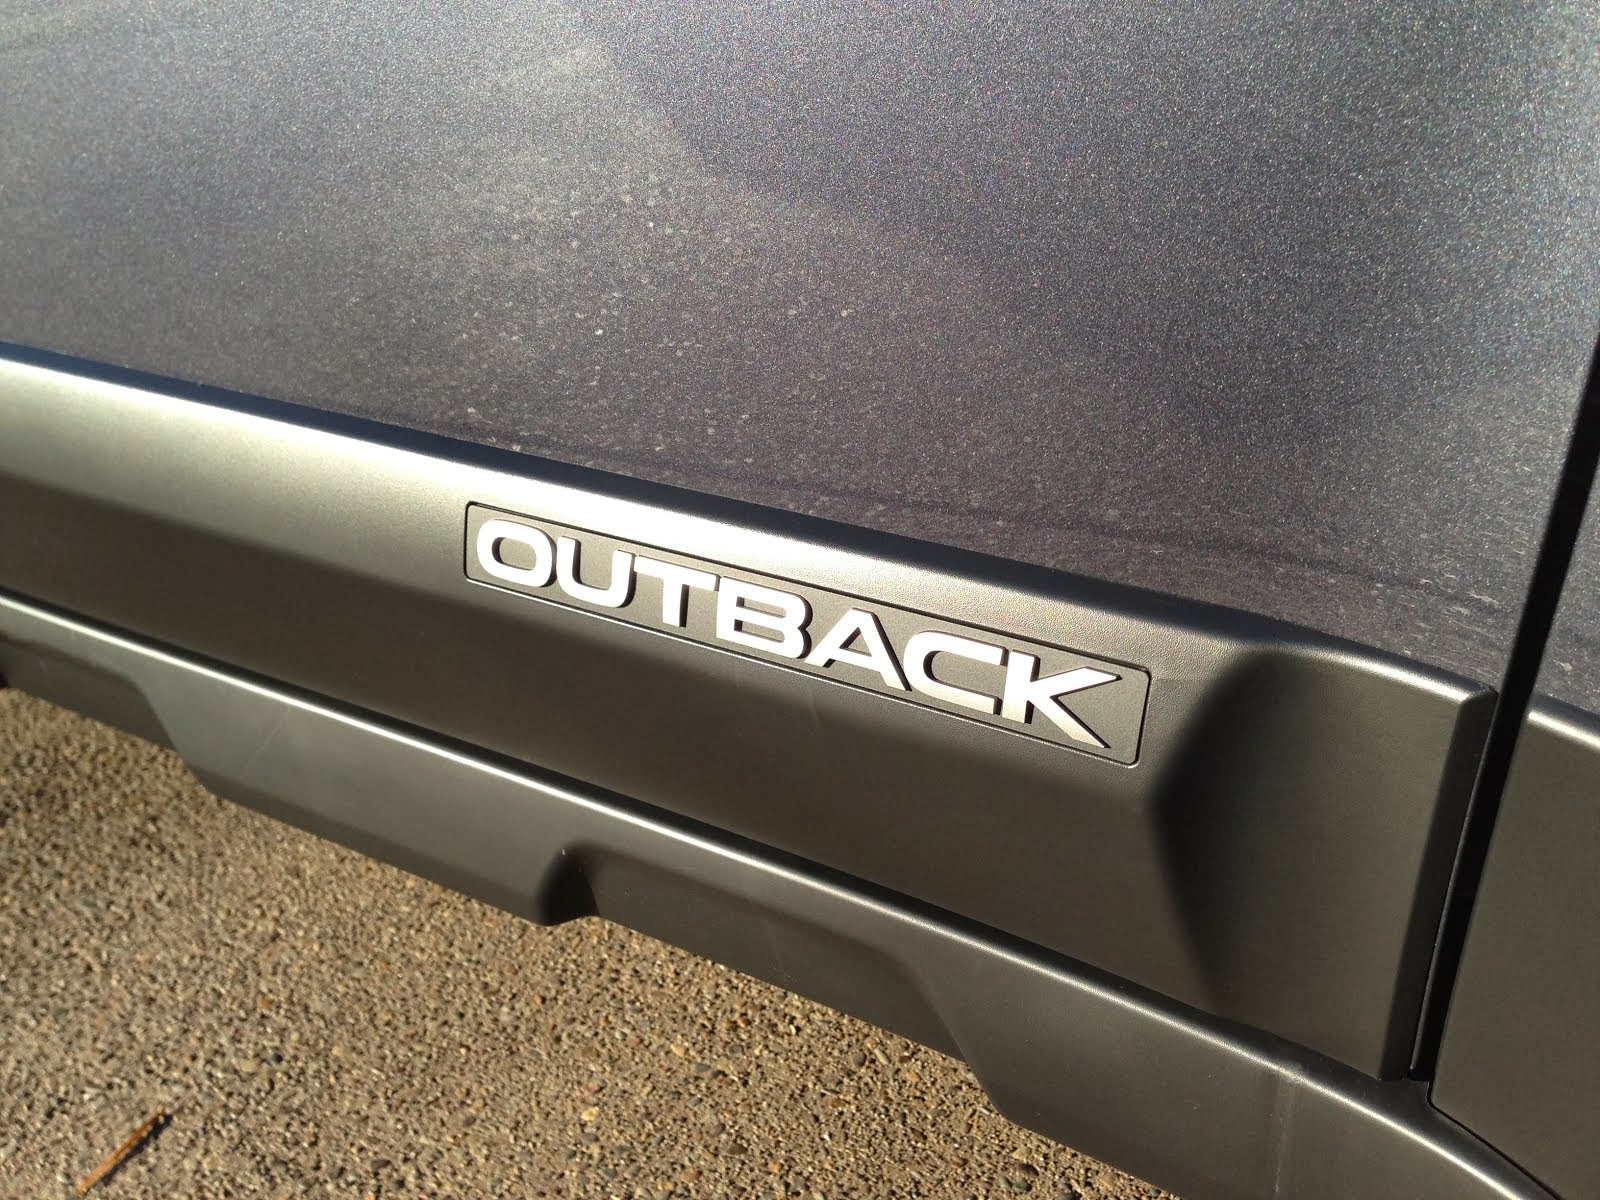 Outback.